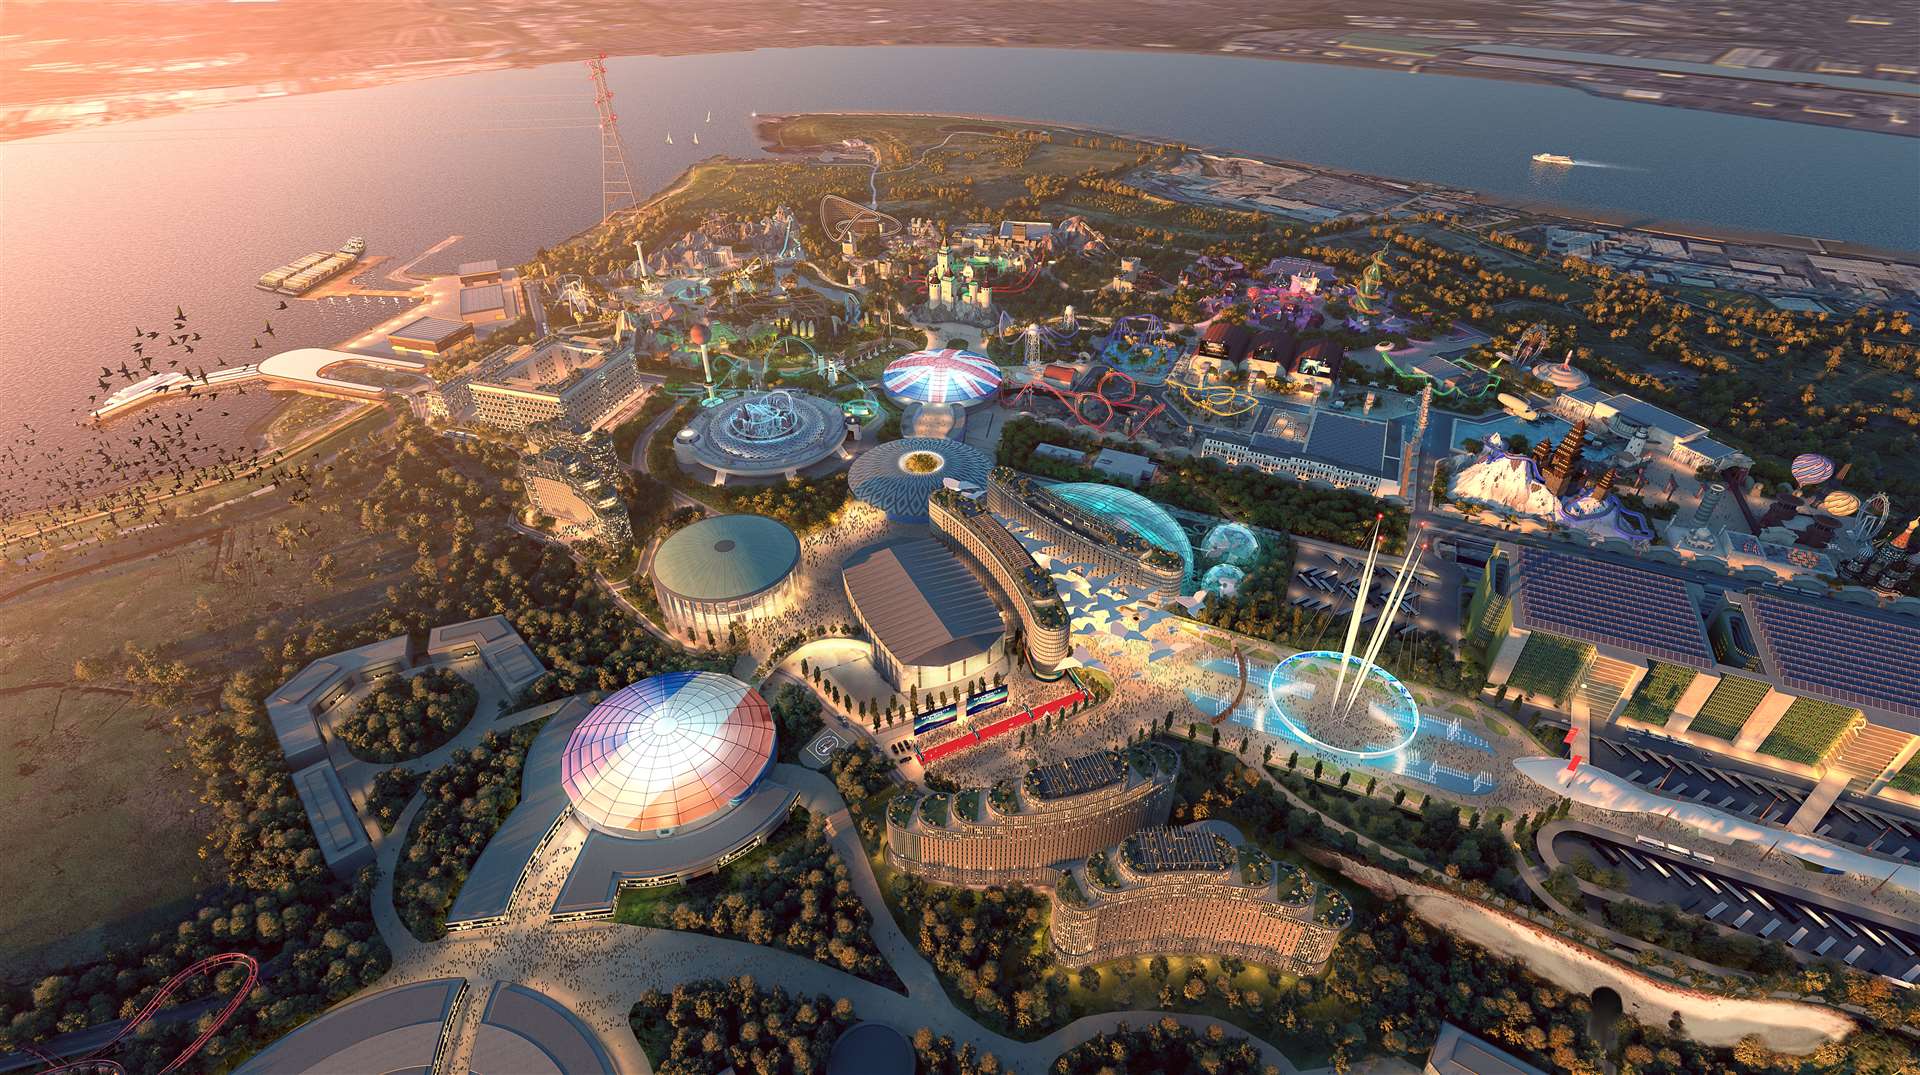 A detailed CGI impression of what the London Resort theme park might look like, submitted as part of the previous application